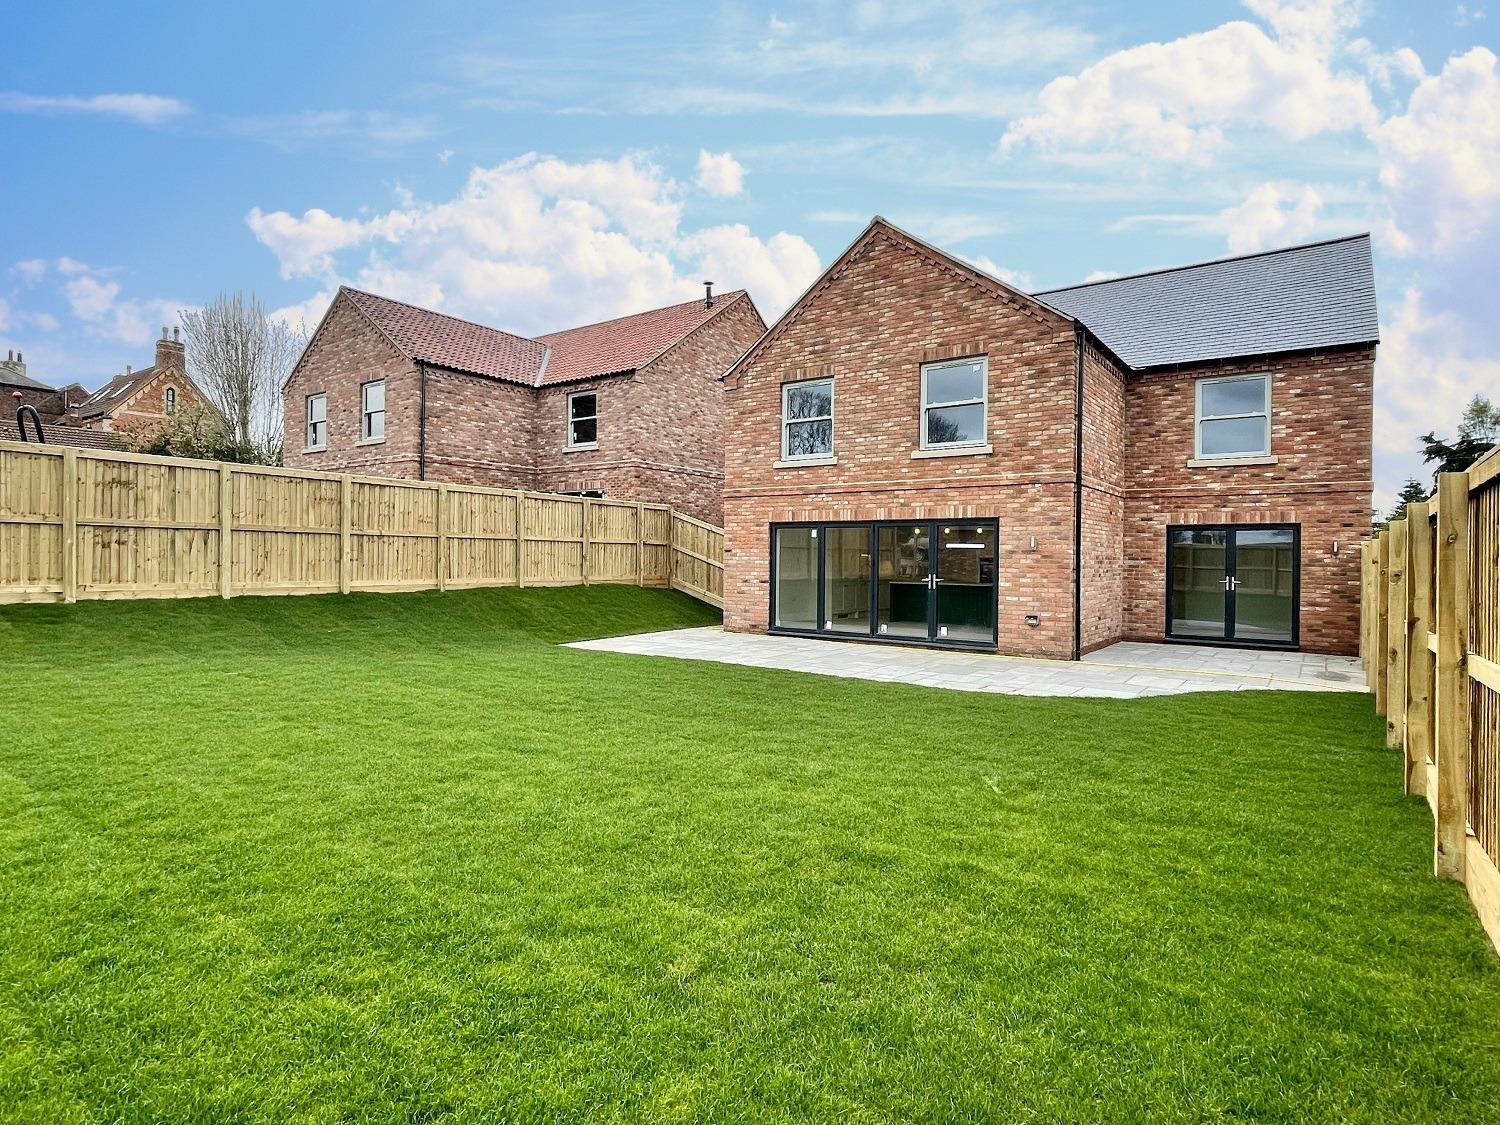 Four-bedroom family home in North Yorkshire